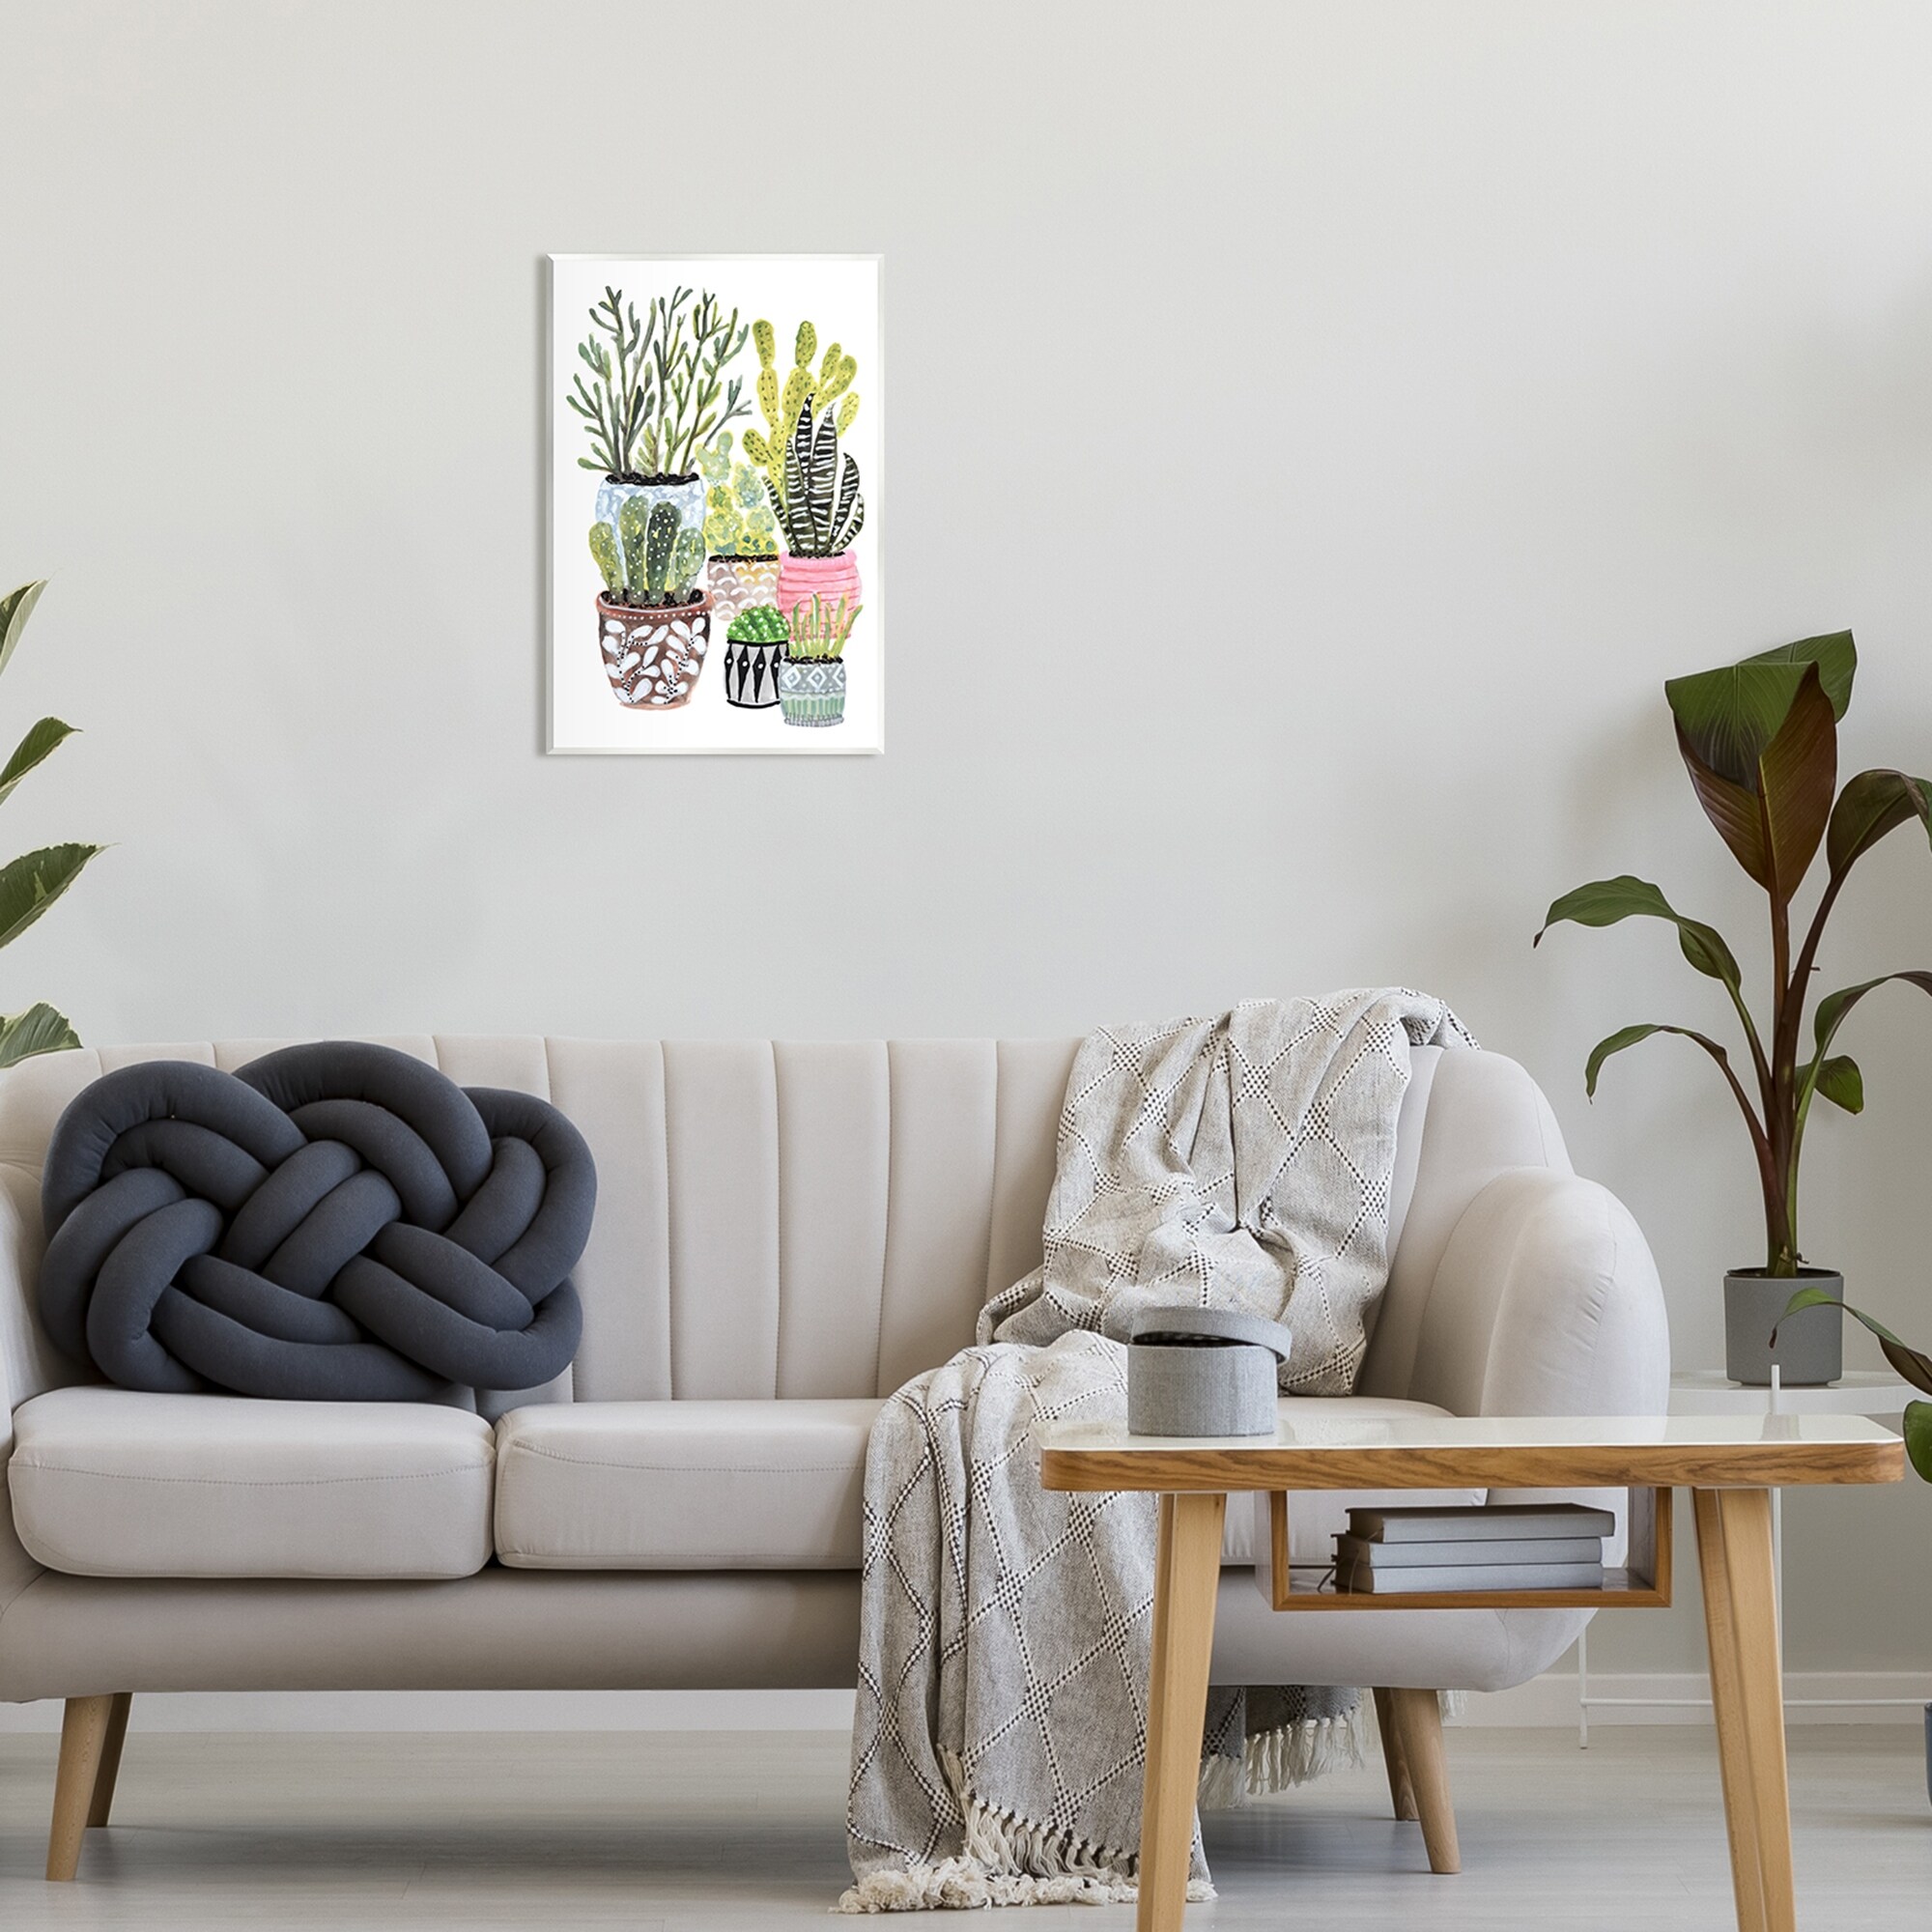 Stupell Industries Various Cactus House Plants Wall Plaque Art by Karen Fields